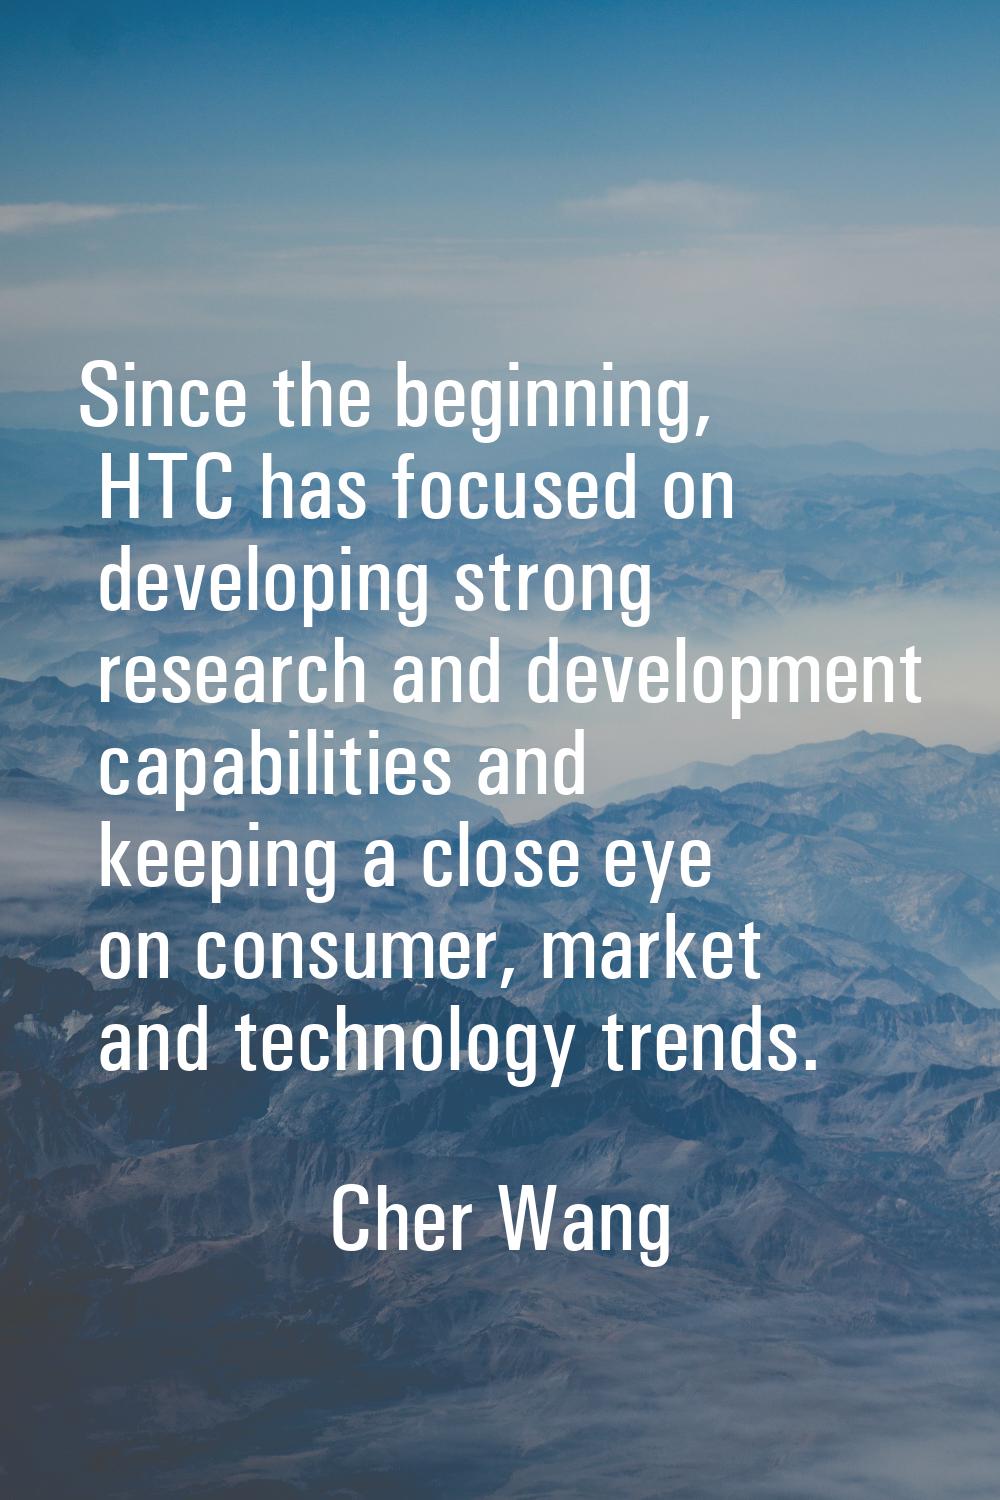 Since the beginning, HTC has focused on developing strong research and development capabilities and